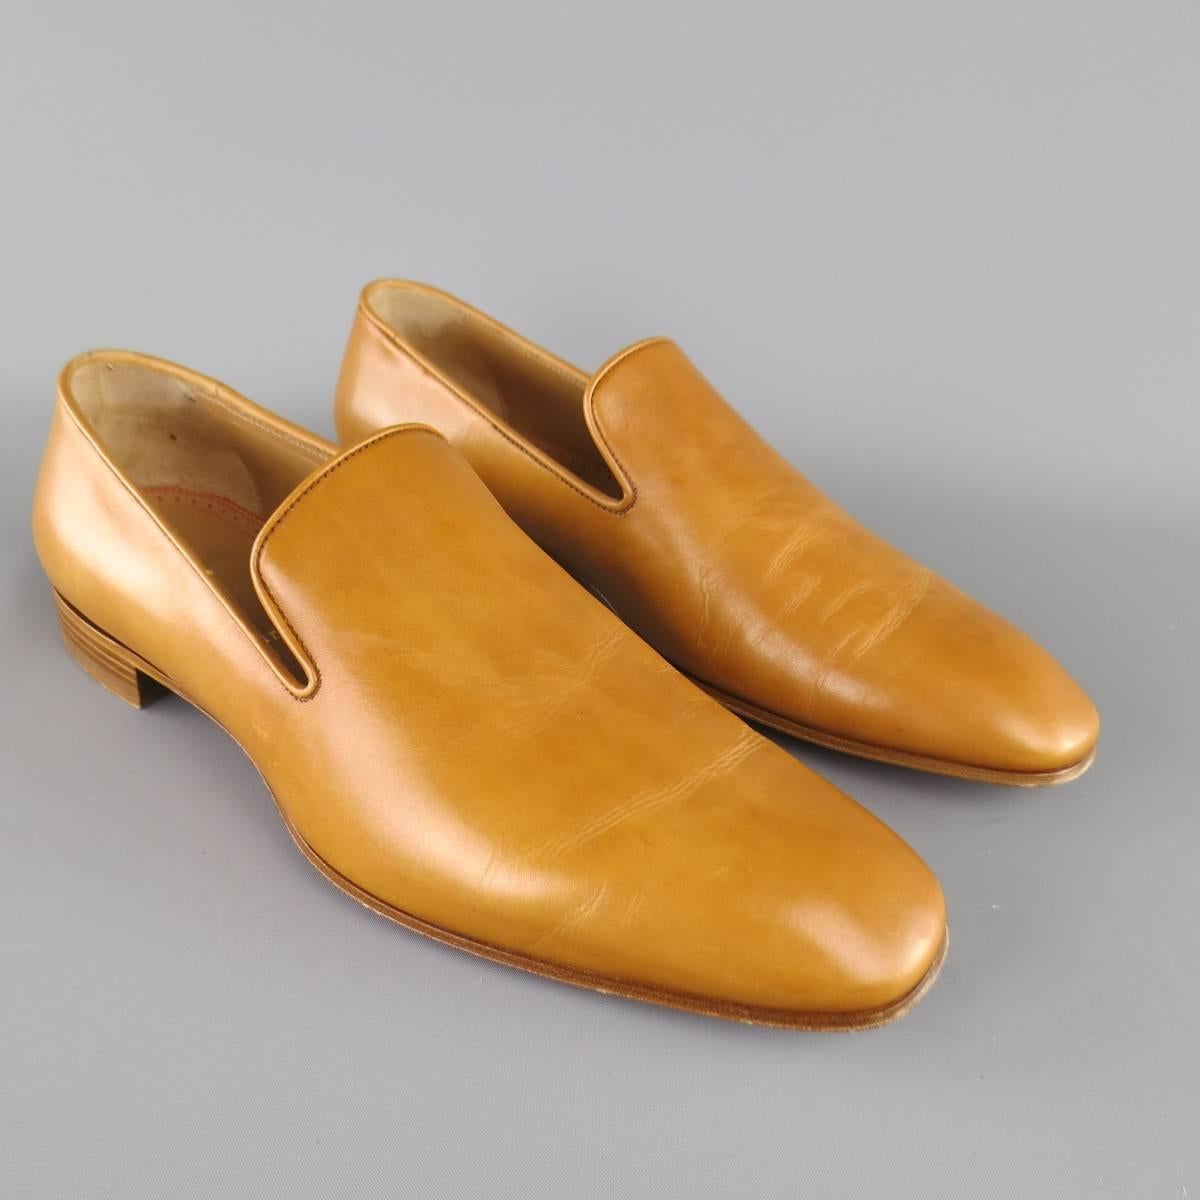 CHRISTIAN LOUBOUTIN "Dandelion Flat" loafers in a tan smooth leather with signature red sole. w\With Box. Made in Italy.
 
Excellent Pre-Owned Condition.
Marked: IT 42
 
Outsole: 12 x 3.75 in.